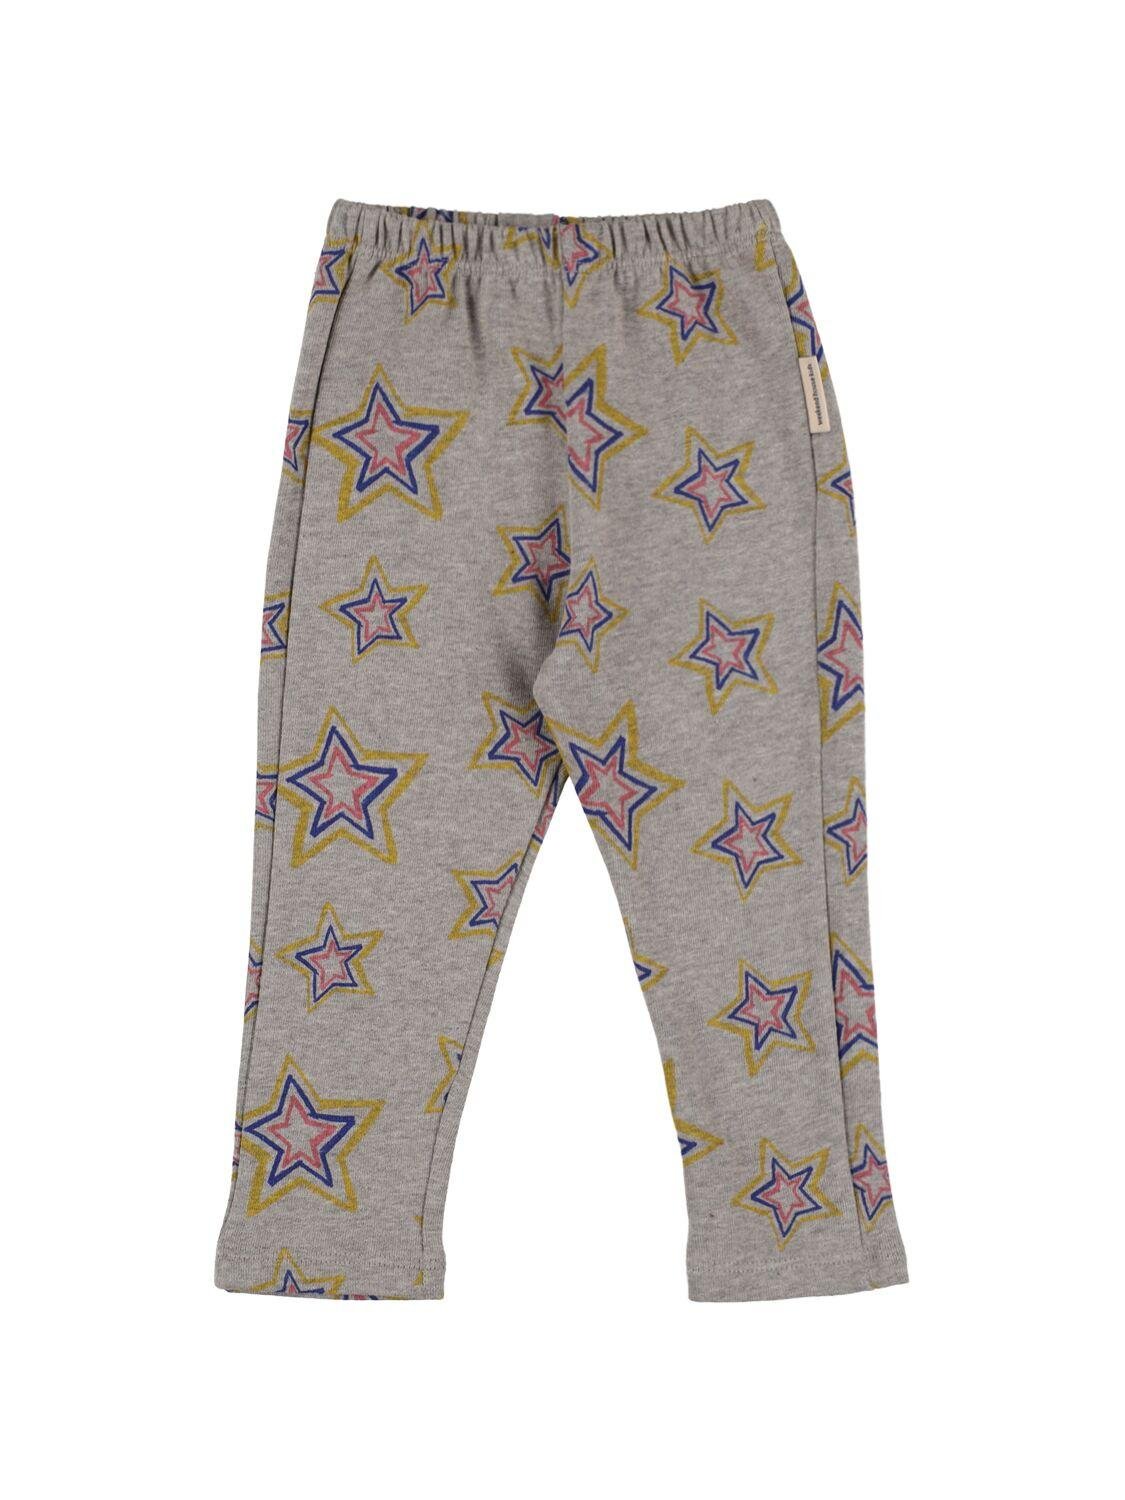 Printed Cotton Sweatpants by WEEKEND HOUSE KIDS